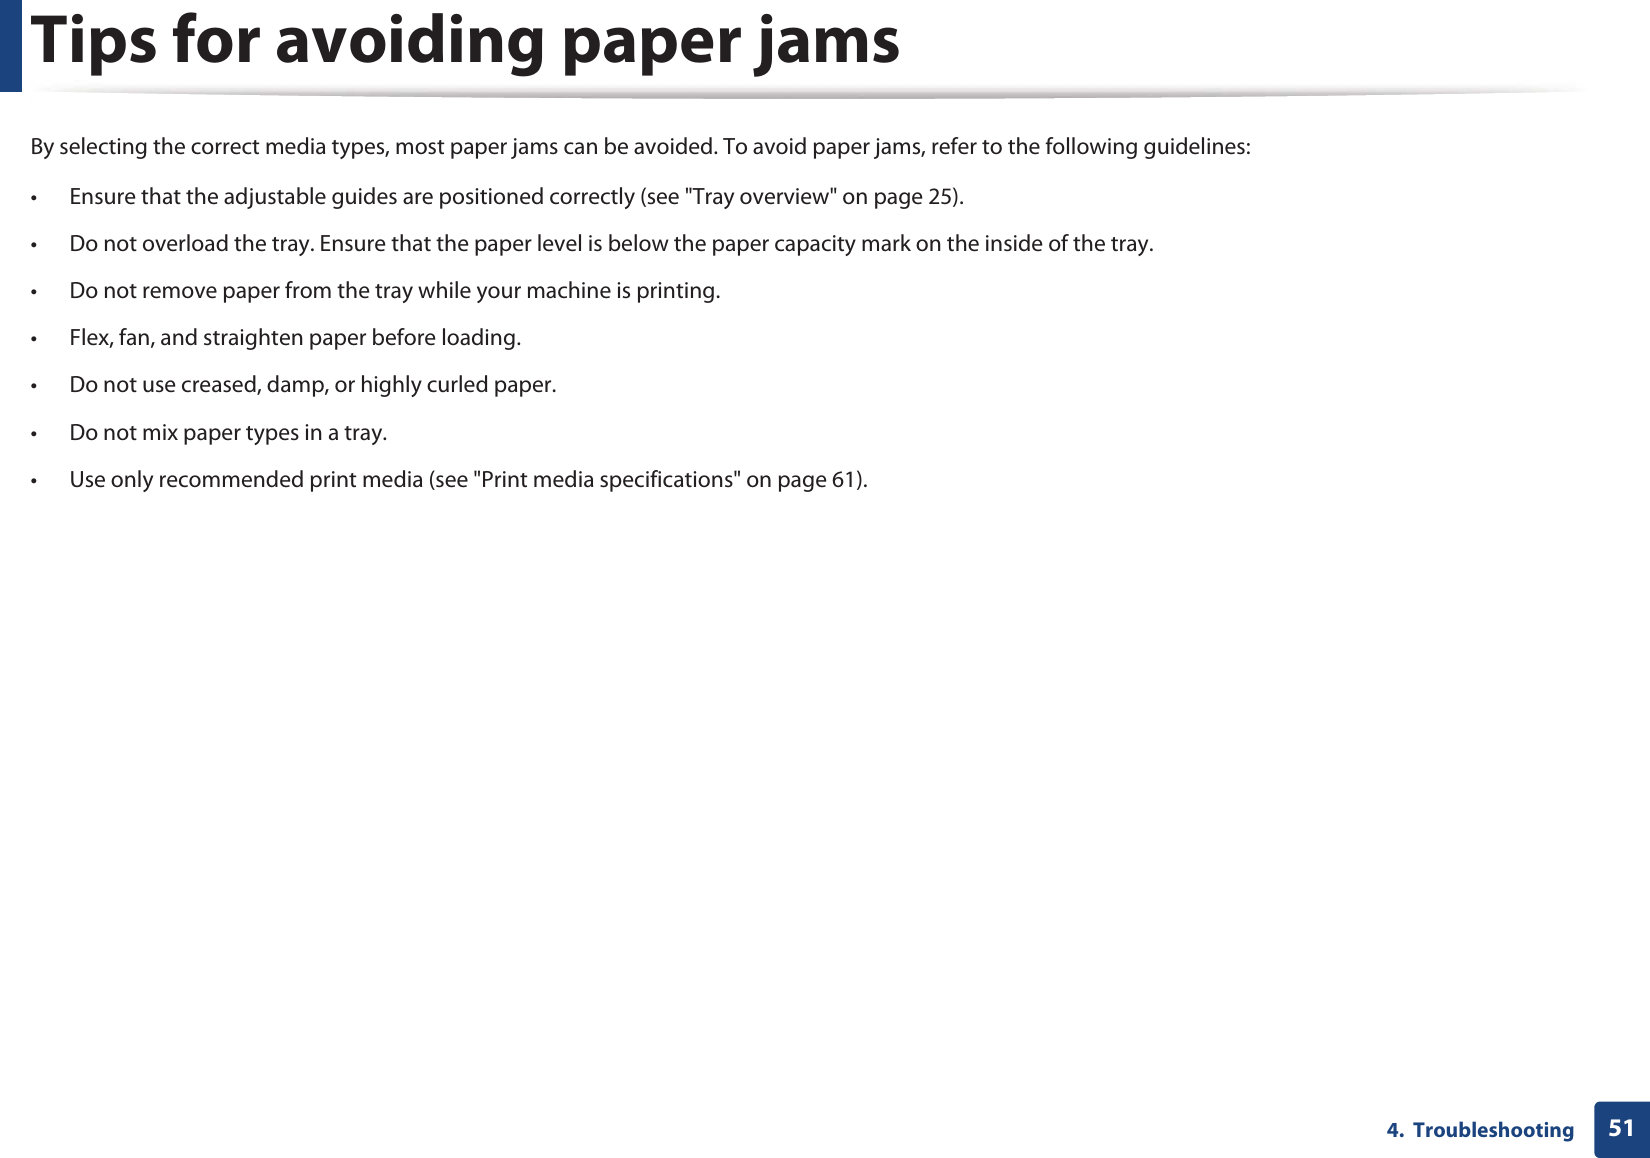 514.  TroubleshootingTips for avoiding paper jamsBy selecting the correct media types, most paper jams can be avoided. To avoid paper jams, refer to the following guidelines:• Ensure that the adjustable guides are positioned correctly (see &quot;Tray overview&quot; on page 25).• Do not overload the tray. Ensure that the paper level is below the paper capacity mark on the inside of the tray.• Do not remove paper from the tray while your machine is printing.• Flex, fan, and straighten paper before loading. • Do not use creased, damp, or highly curled paper.• Do not mix paper types in a tray.• Use only recommended print media (see &quot;Print media specifications&quot; on page 61).